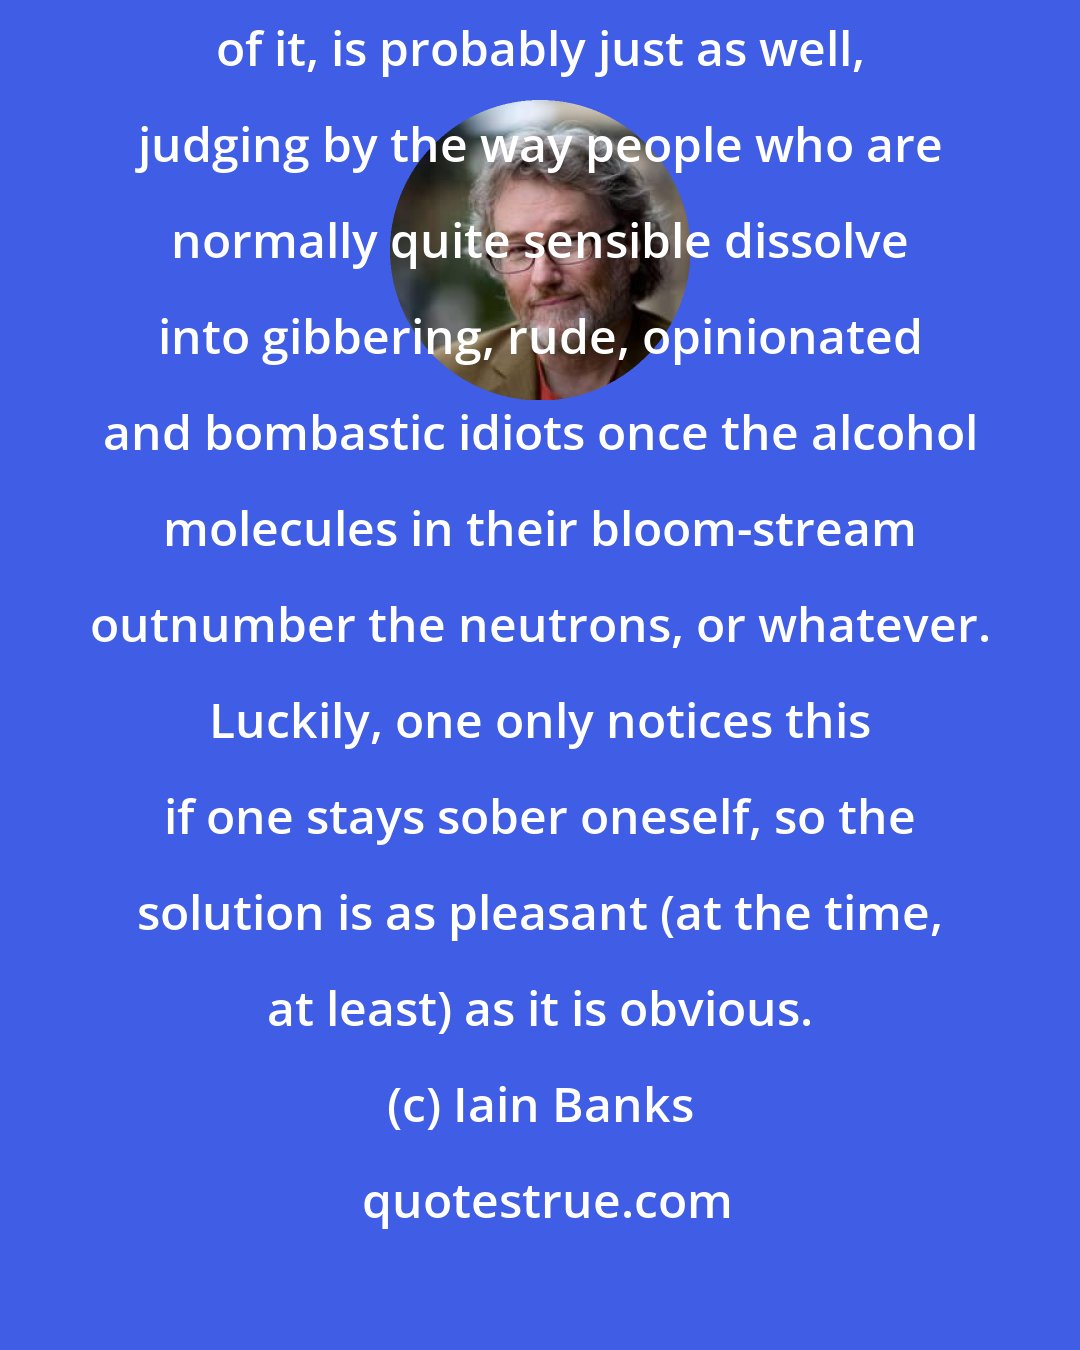 Iain Banks: I'm too drunk to recall much of what I've said. Which, come to think of it, is probably just as well, judging by the way people who are normally quite sensible dissolve into gibbering, rude, opinionated and bombastic idiots once the alcohol molecules in their bloom-stream outnumber the neutrons, or whatever. Luckily, one only notices this if one stays sober oneself, so the solution is as pleasant (at the time, at least) as it is obvious.